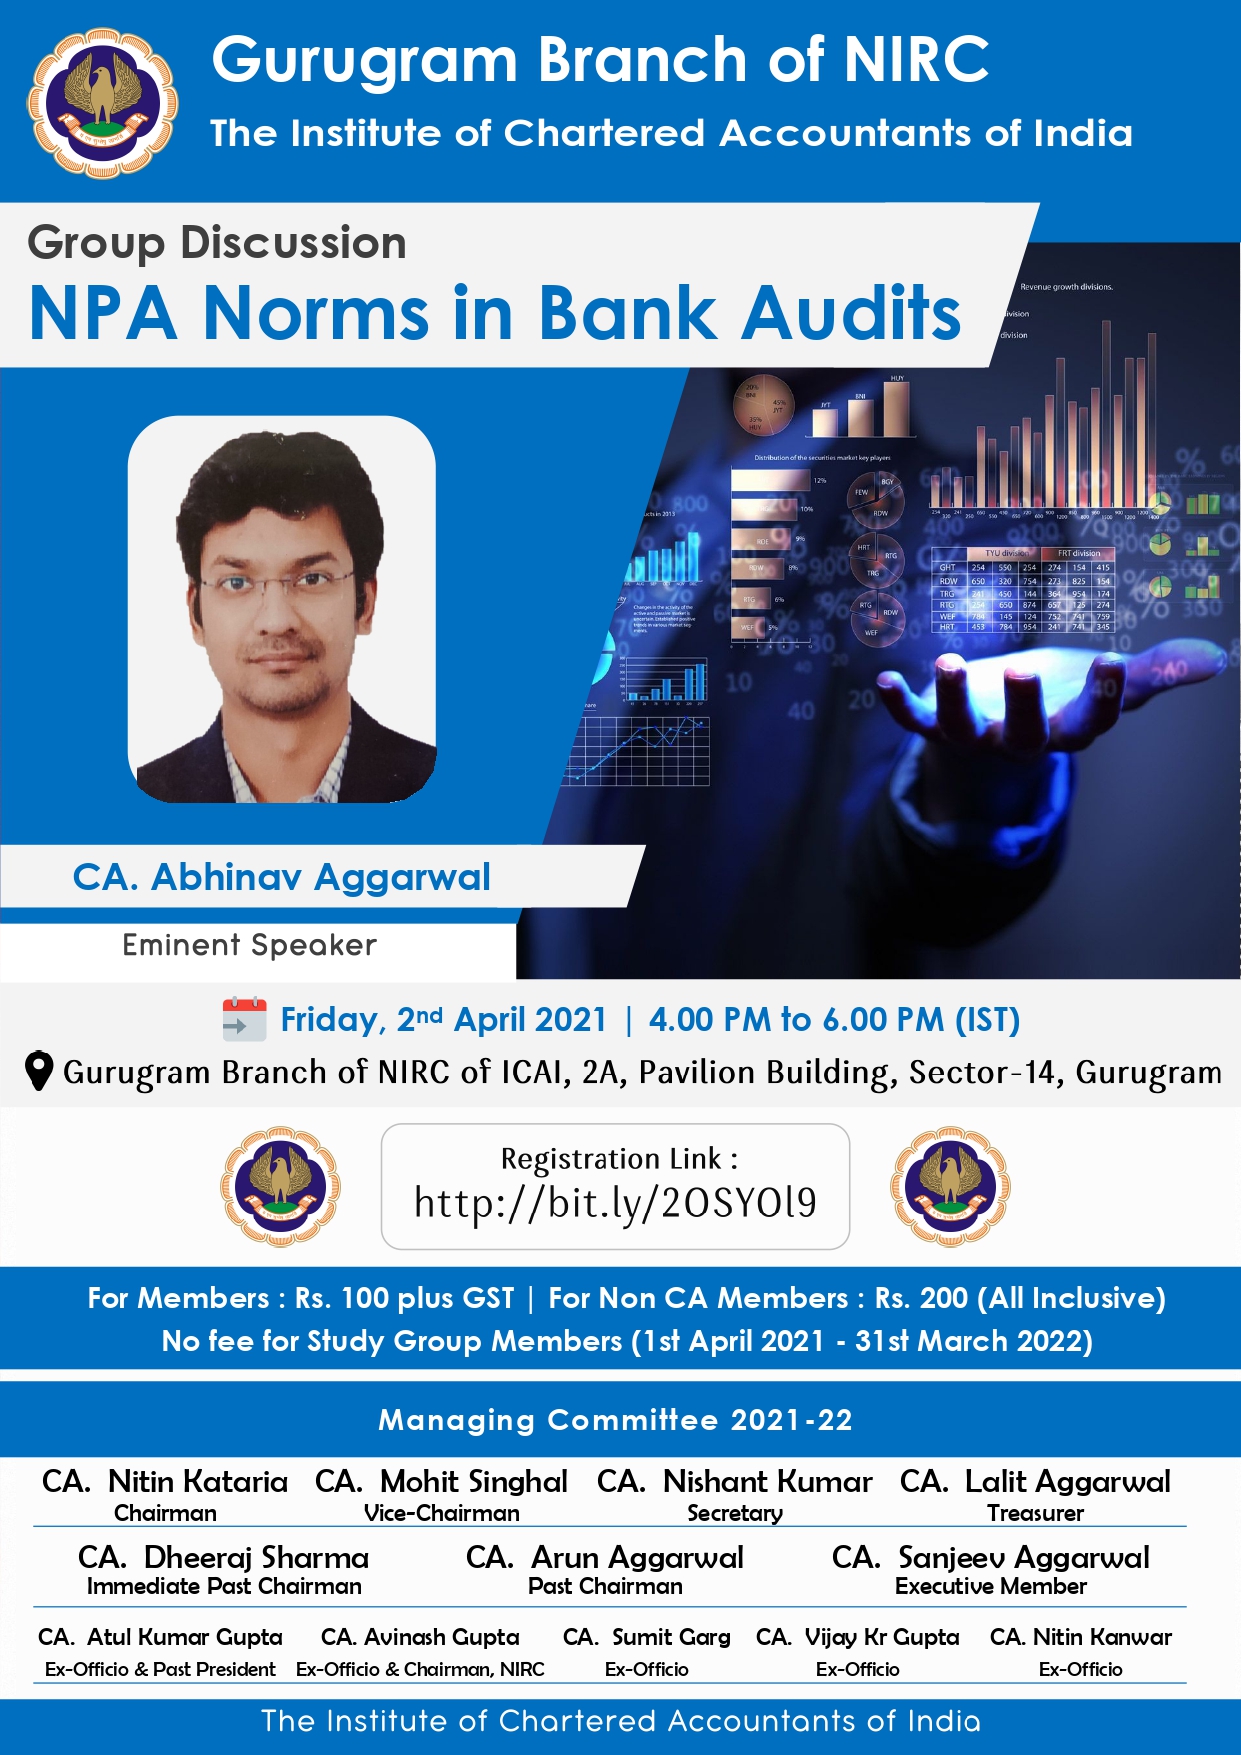 Group Discussion on NPA Norms in Bank Audits